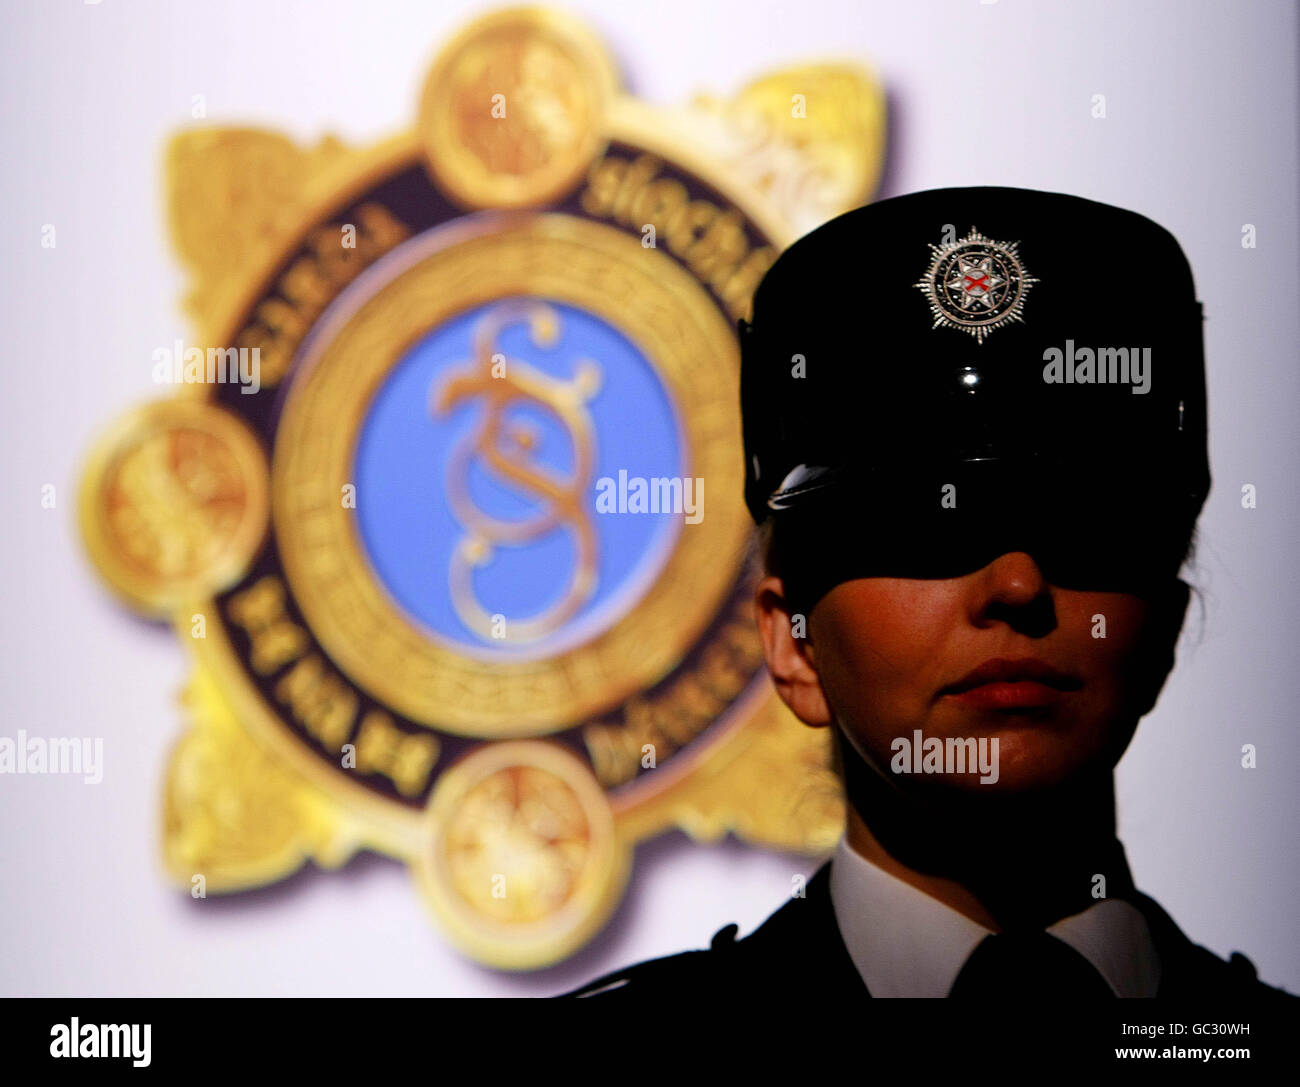 A PSNI Constable beside a Garda Siochana shield at The 2009 International Law Enforcement Intellectual Property Crime Conference at the Four Seasons Hotel, Dublin. Stock Photo